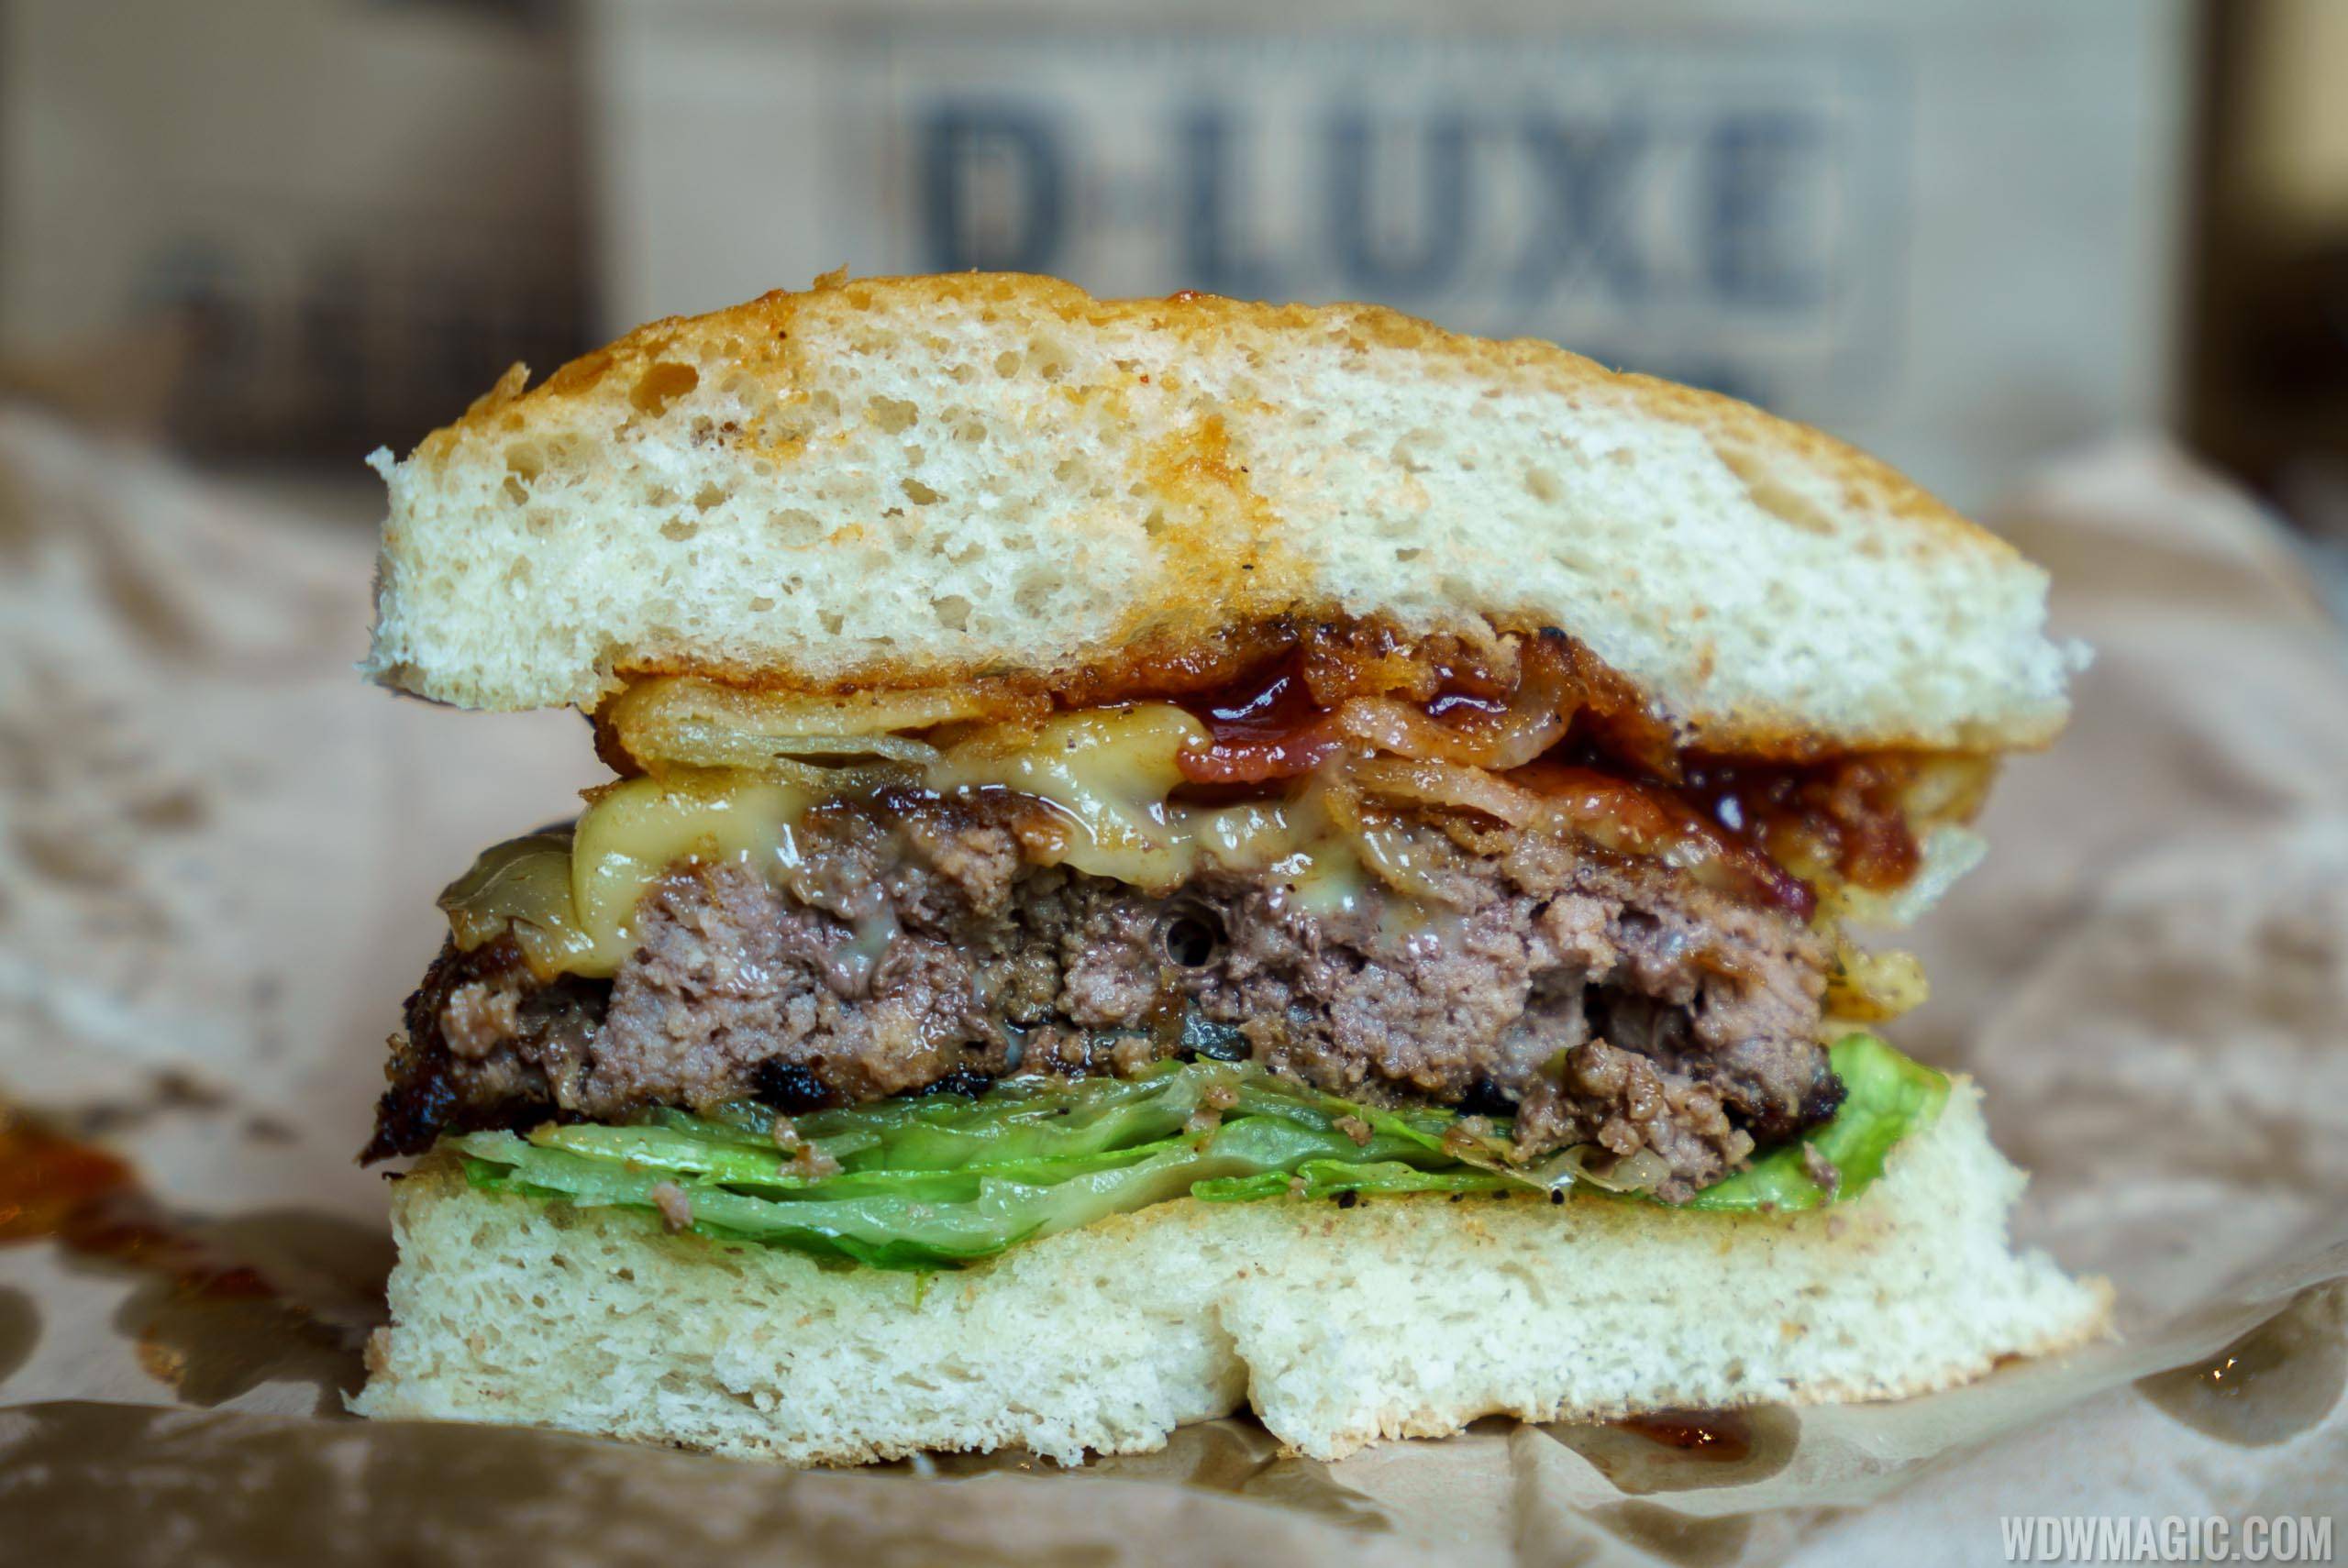 D-Luxe Burger - Barbecue Classic Burger